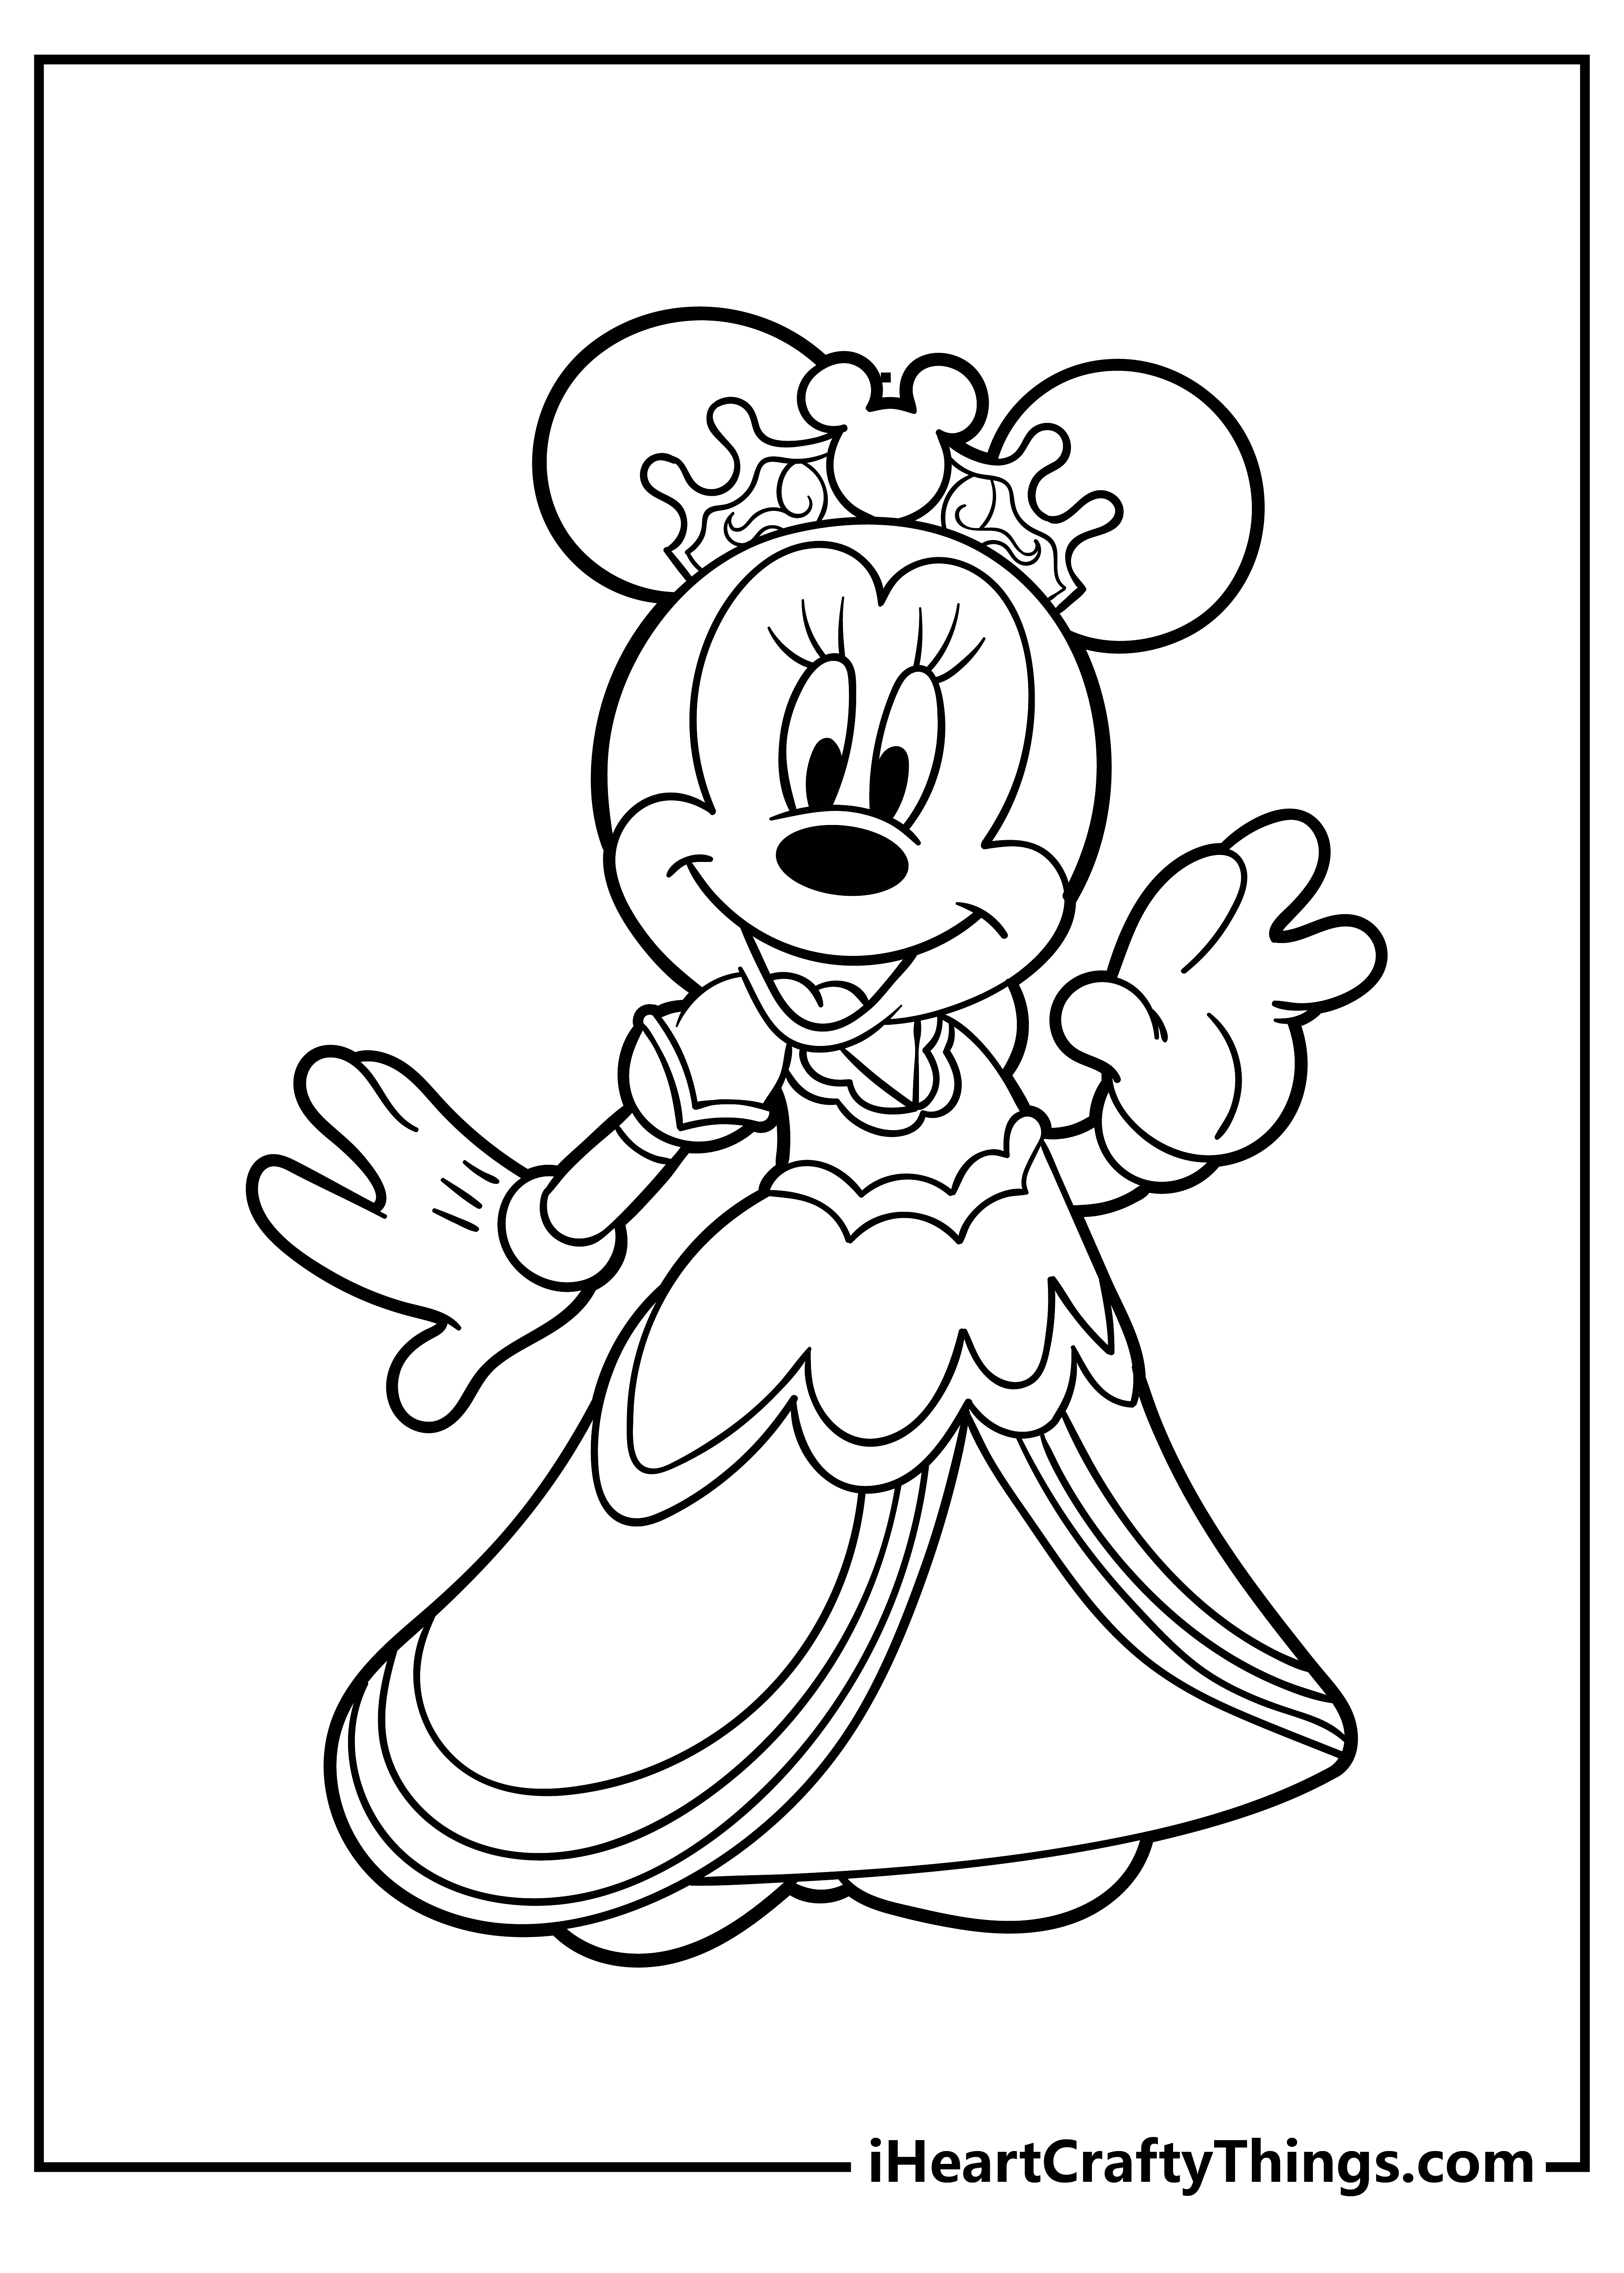 Minnie Mouse Coloring Pages (100% Free Printables) pertaining to Free Printable Minnie Mouse Coloring Pages